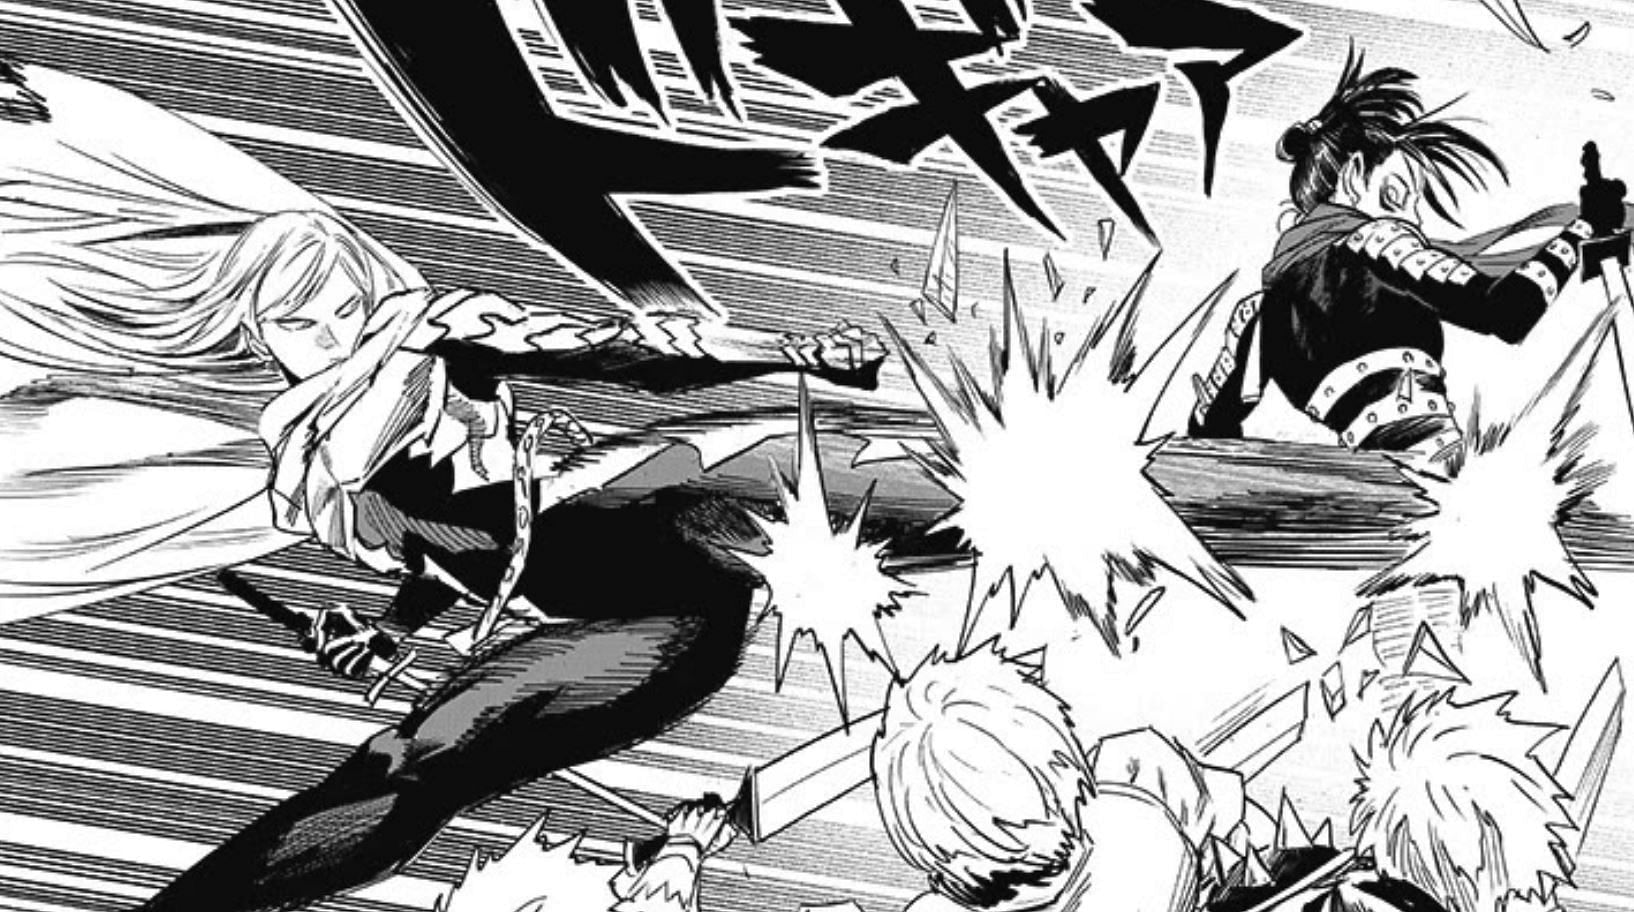 One Punch Man chapter 199: Expected release date, what to expect, and more